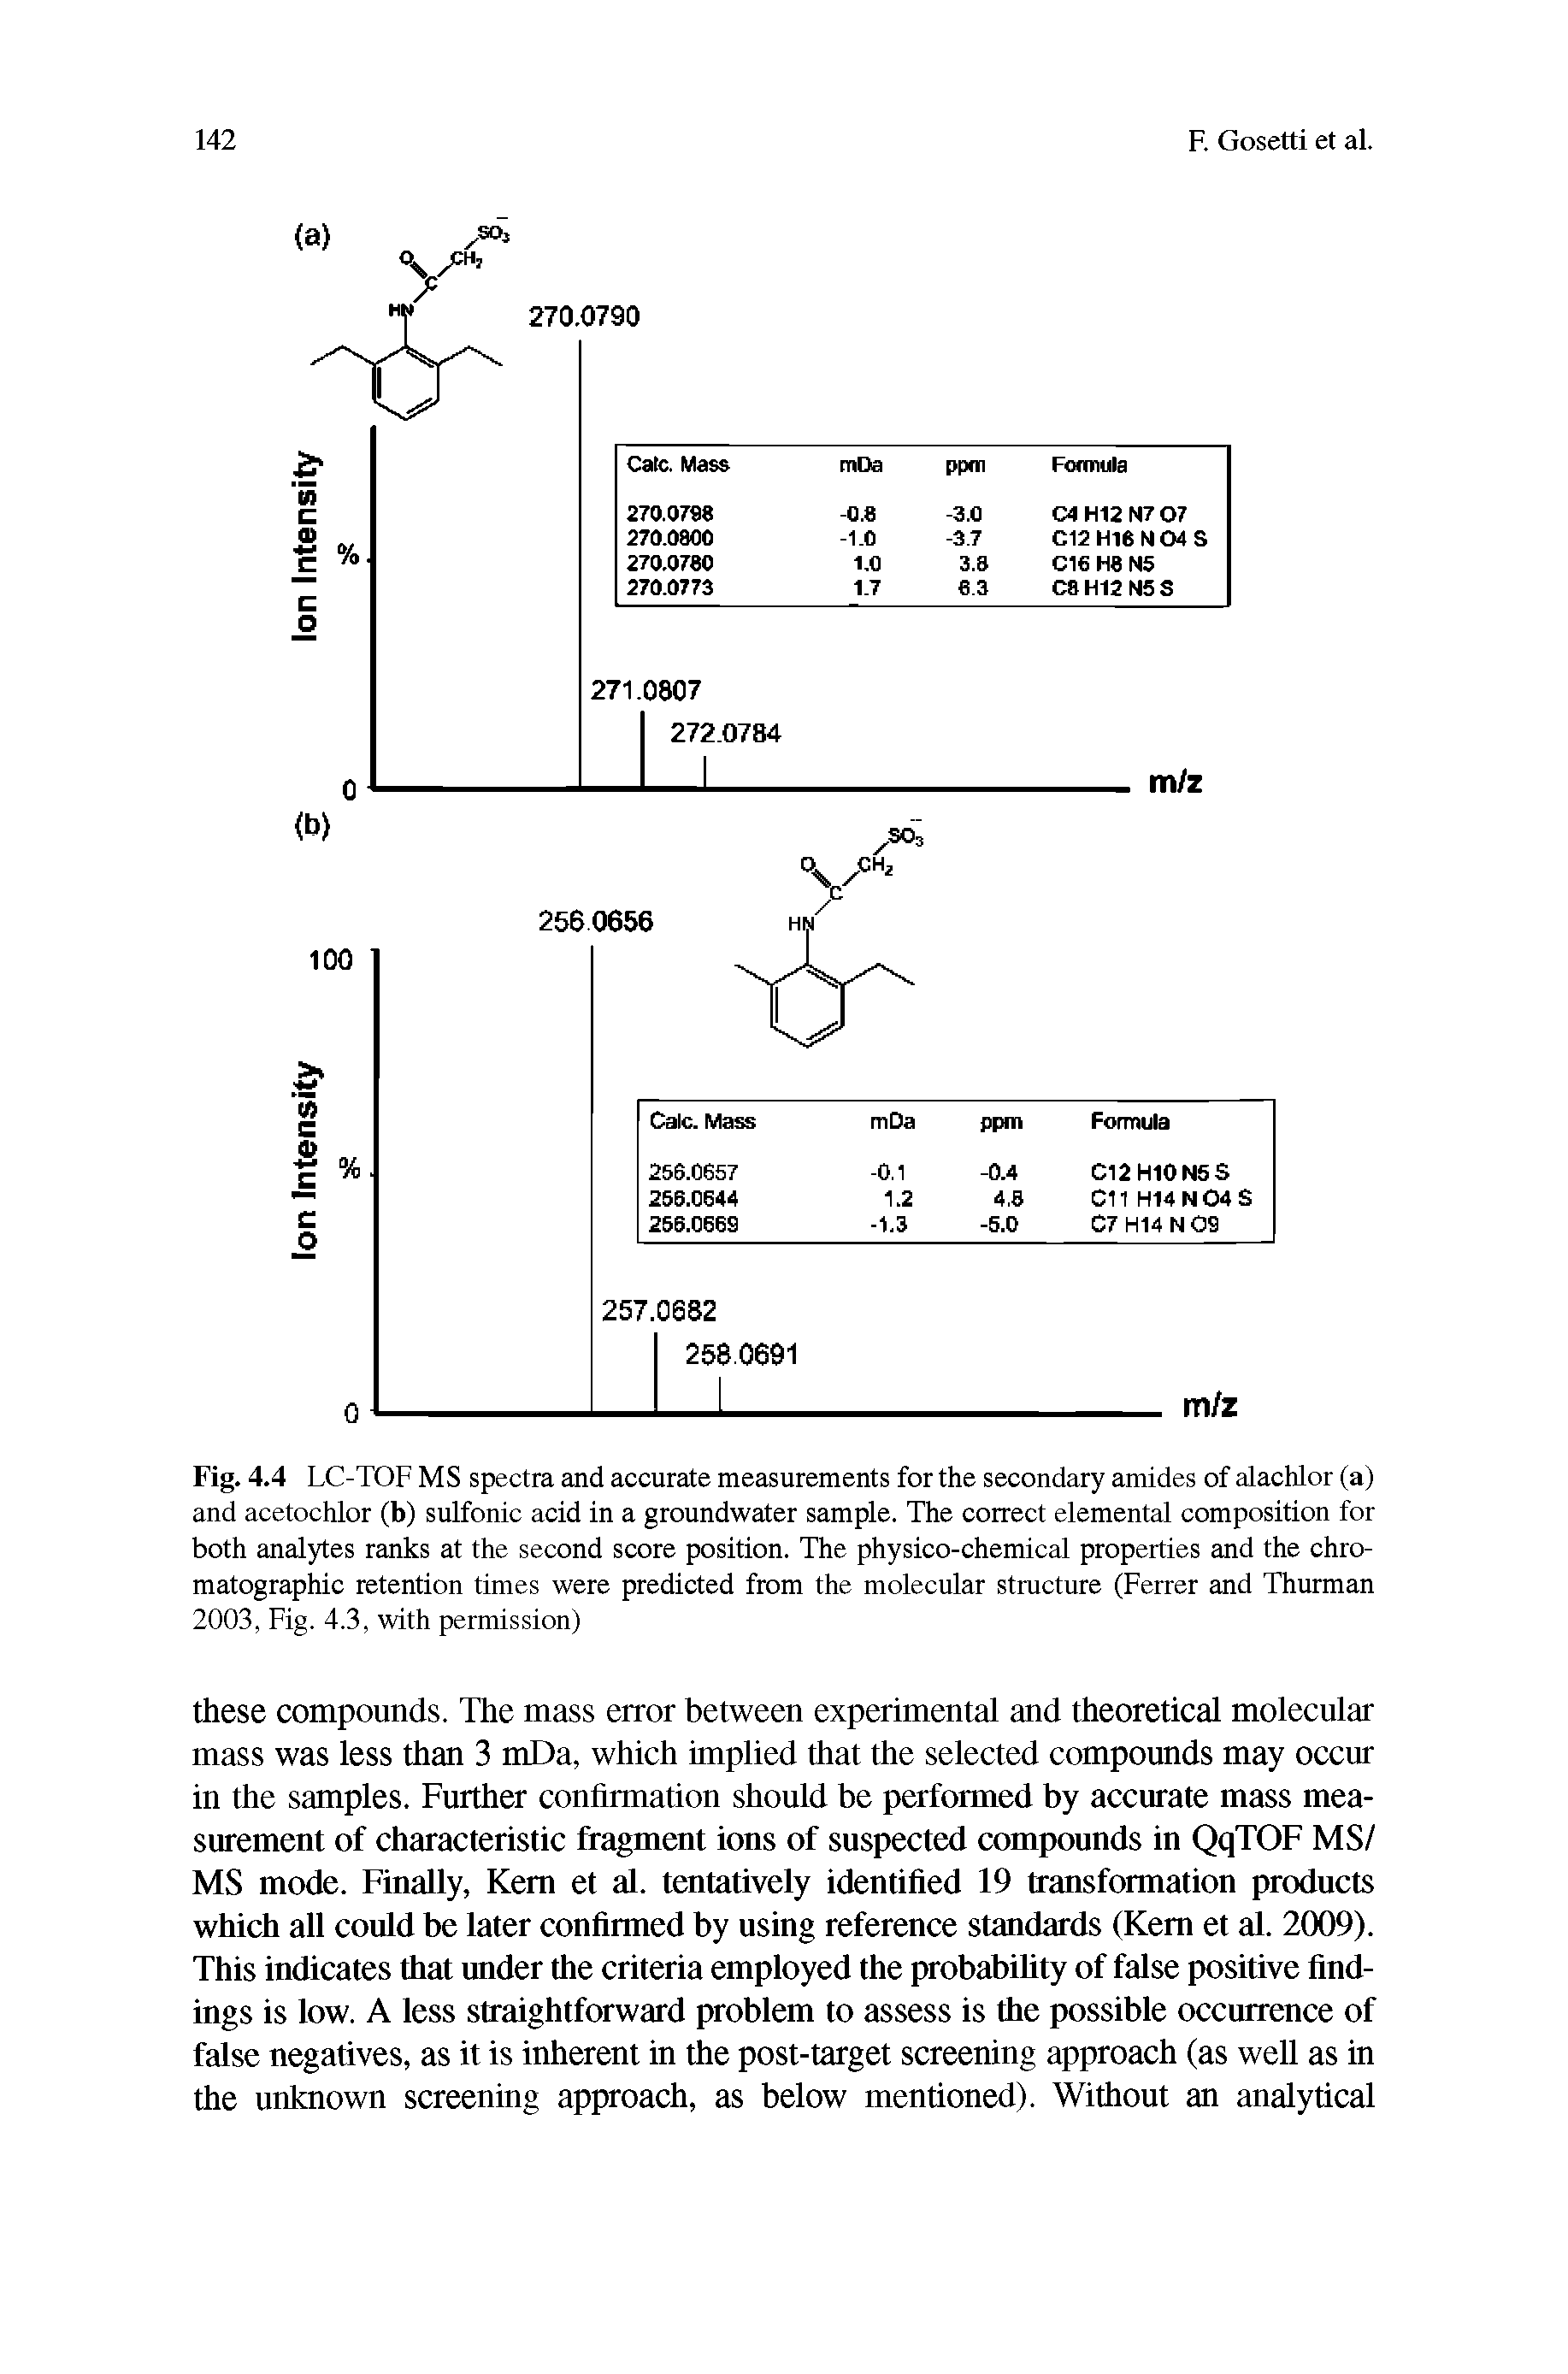 Fig. 4.4 LC-TOF MS spectra and accurate measurements for the secondary amides of alachlor (a) and acetochlor (b) sulfonic acid in a groundwater sample. The correct elemental composition for both analytes ranks at the second score position. The physico-chemical properties and the chromatographic retention times were predicted from the molecular structure (Ferrer and Thurman 2003, Fig. 4.3, with permission)...